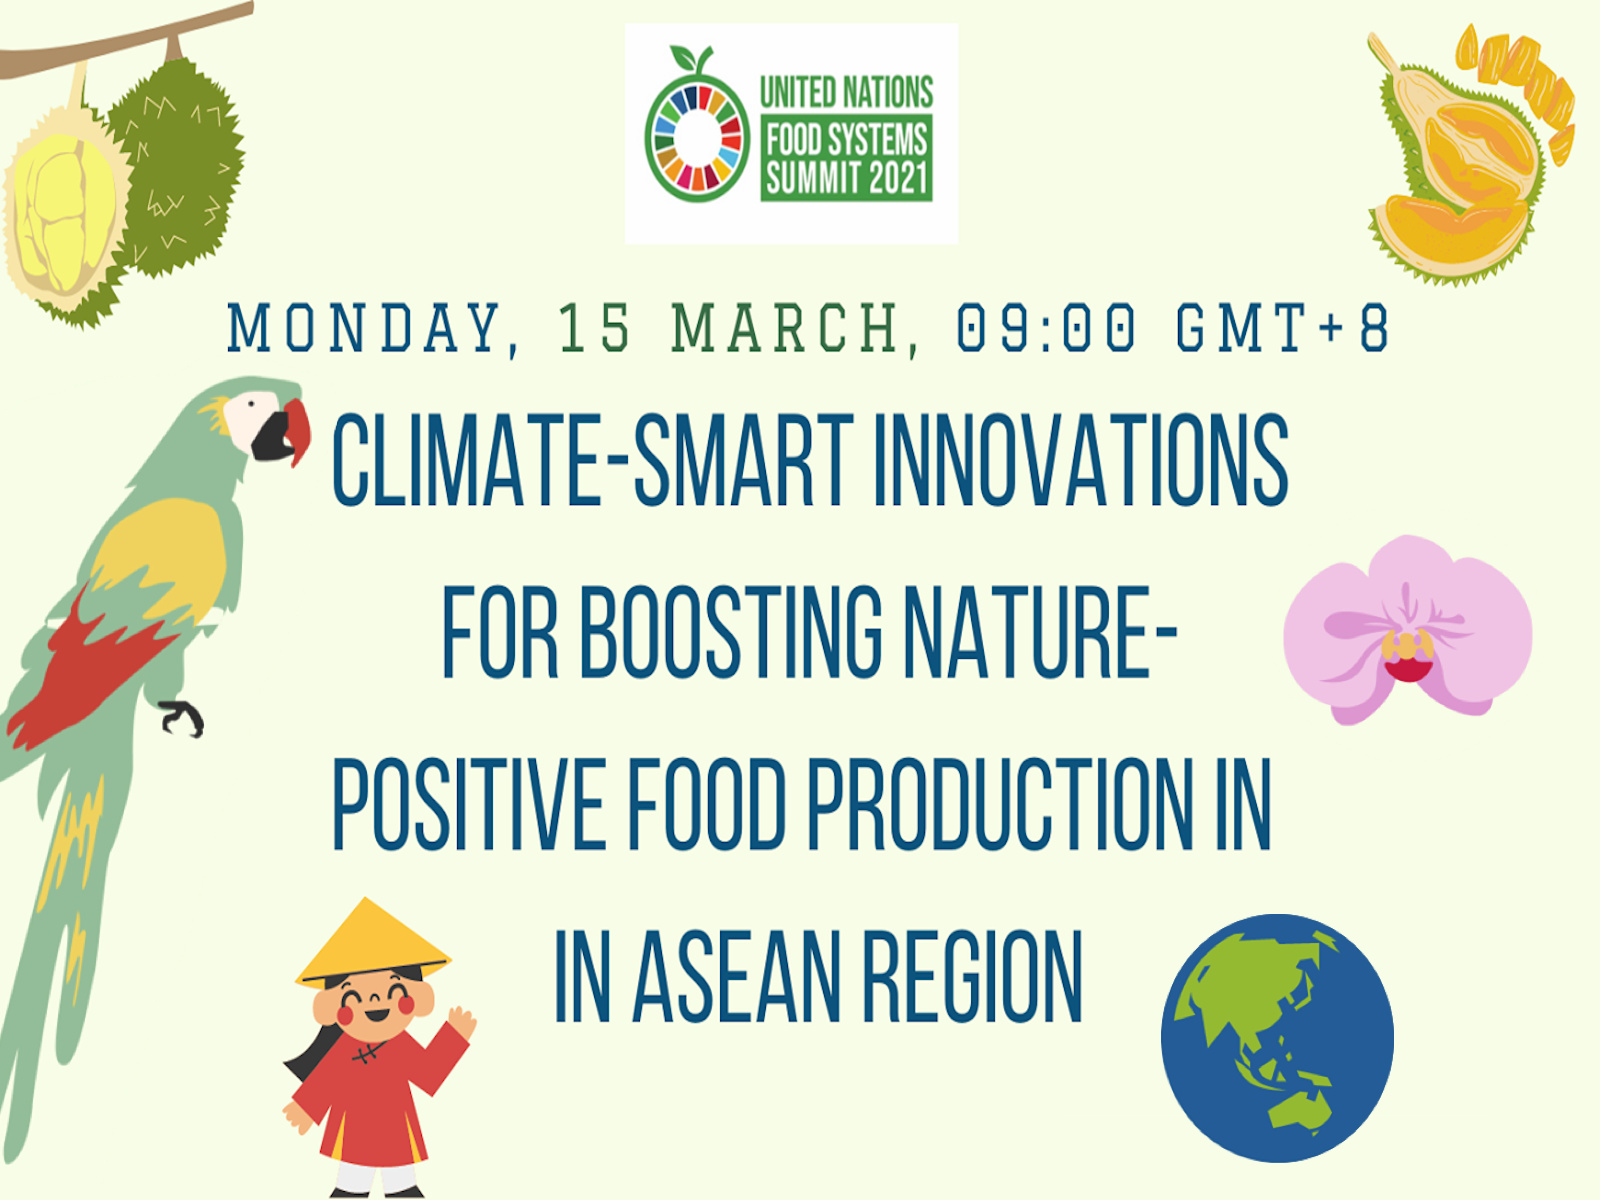 ASEAN Webinar: Climate-Smart Innovations for Boosting Nature-Positive Food Production, 15 March 2021